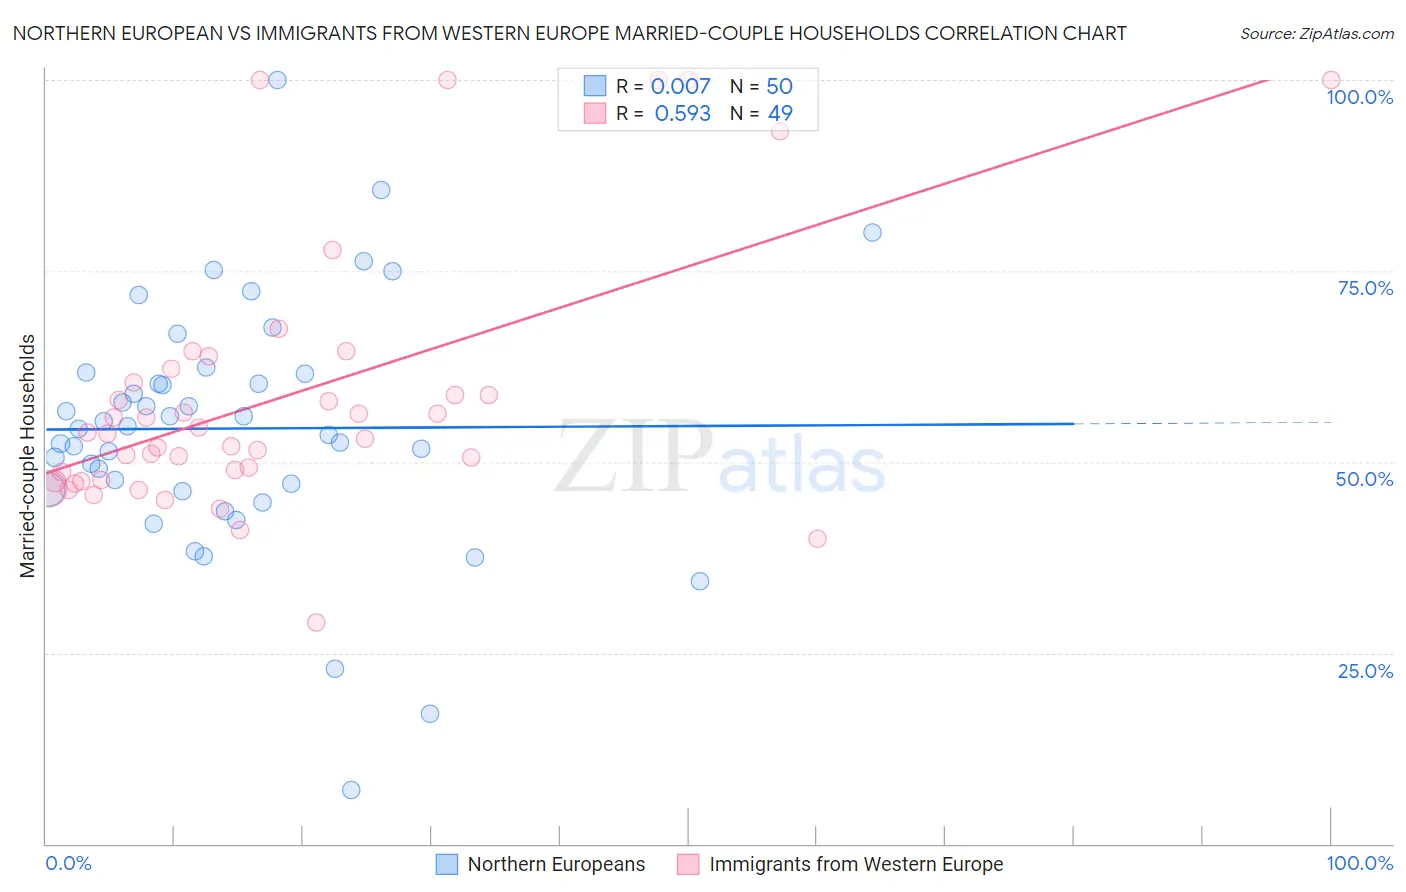 Northern European vs Immigrants from Western Europe Married-couple Households